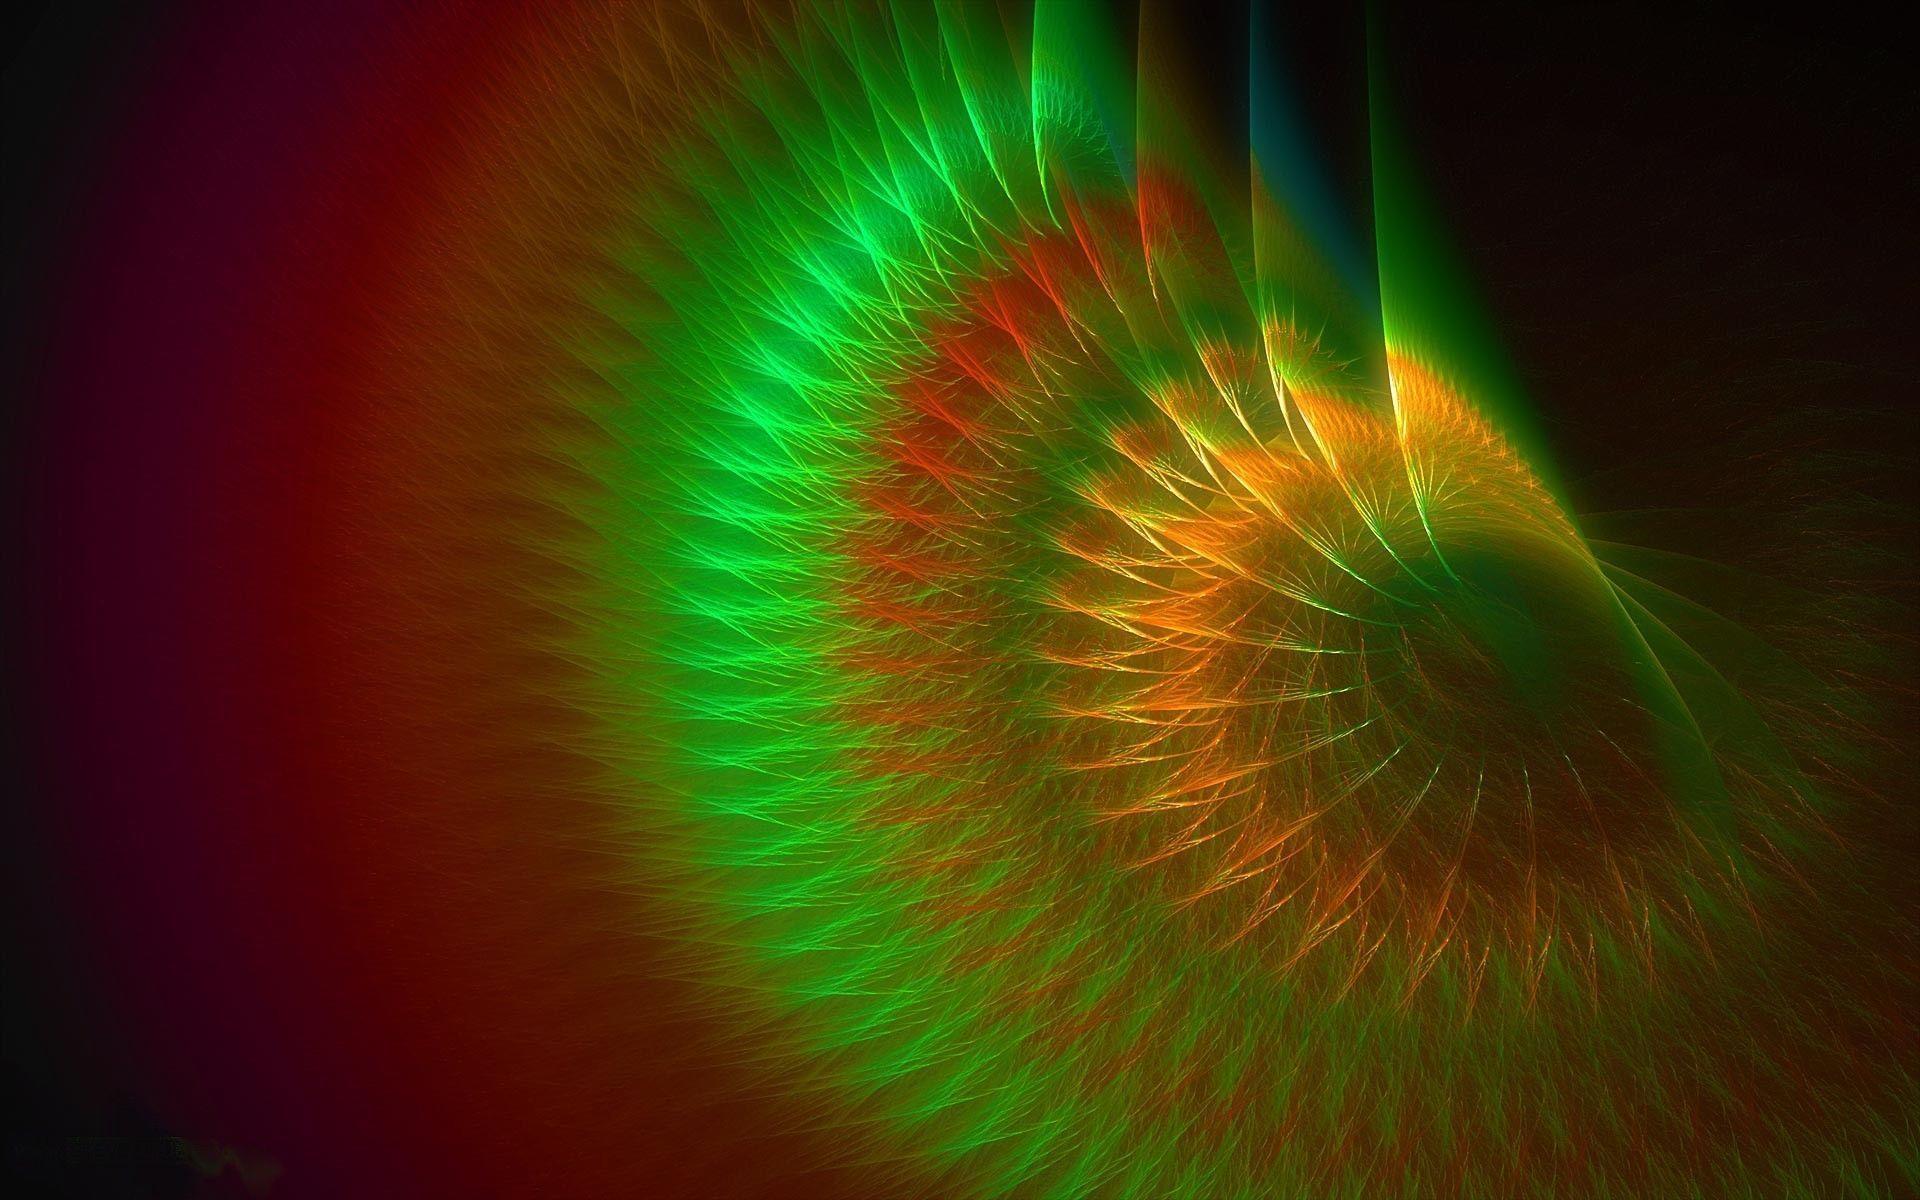 3D & Abstract, Mesmerizing Image 3D & Abstract HD Fresh Image